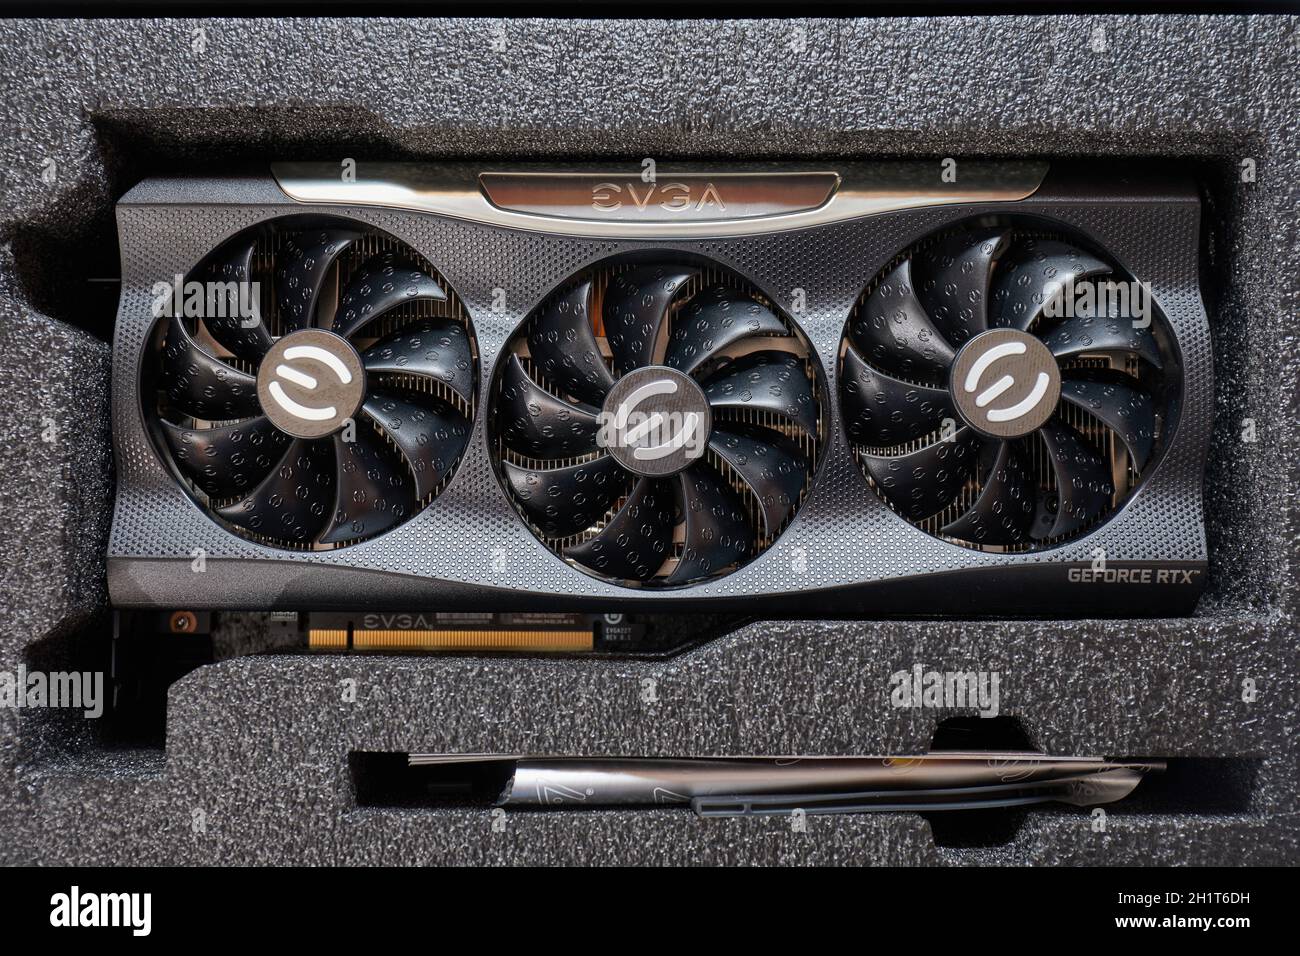 Budapest, Hungary - Circa 2020: Nvidia Geforce RTX 3090 Graphics Card manufactured by EVGA unboxed on a desk. Model: EVGA Geforce RTX 3090 FTW3 Ultra, Stock Photo